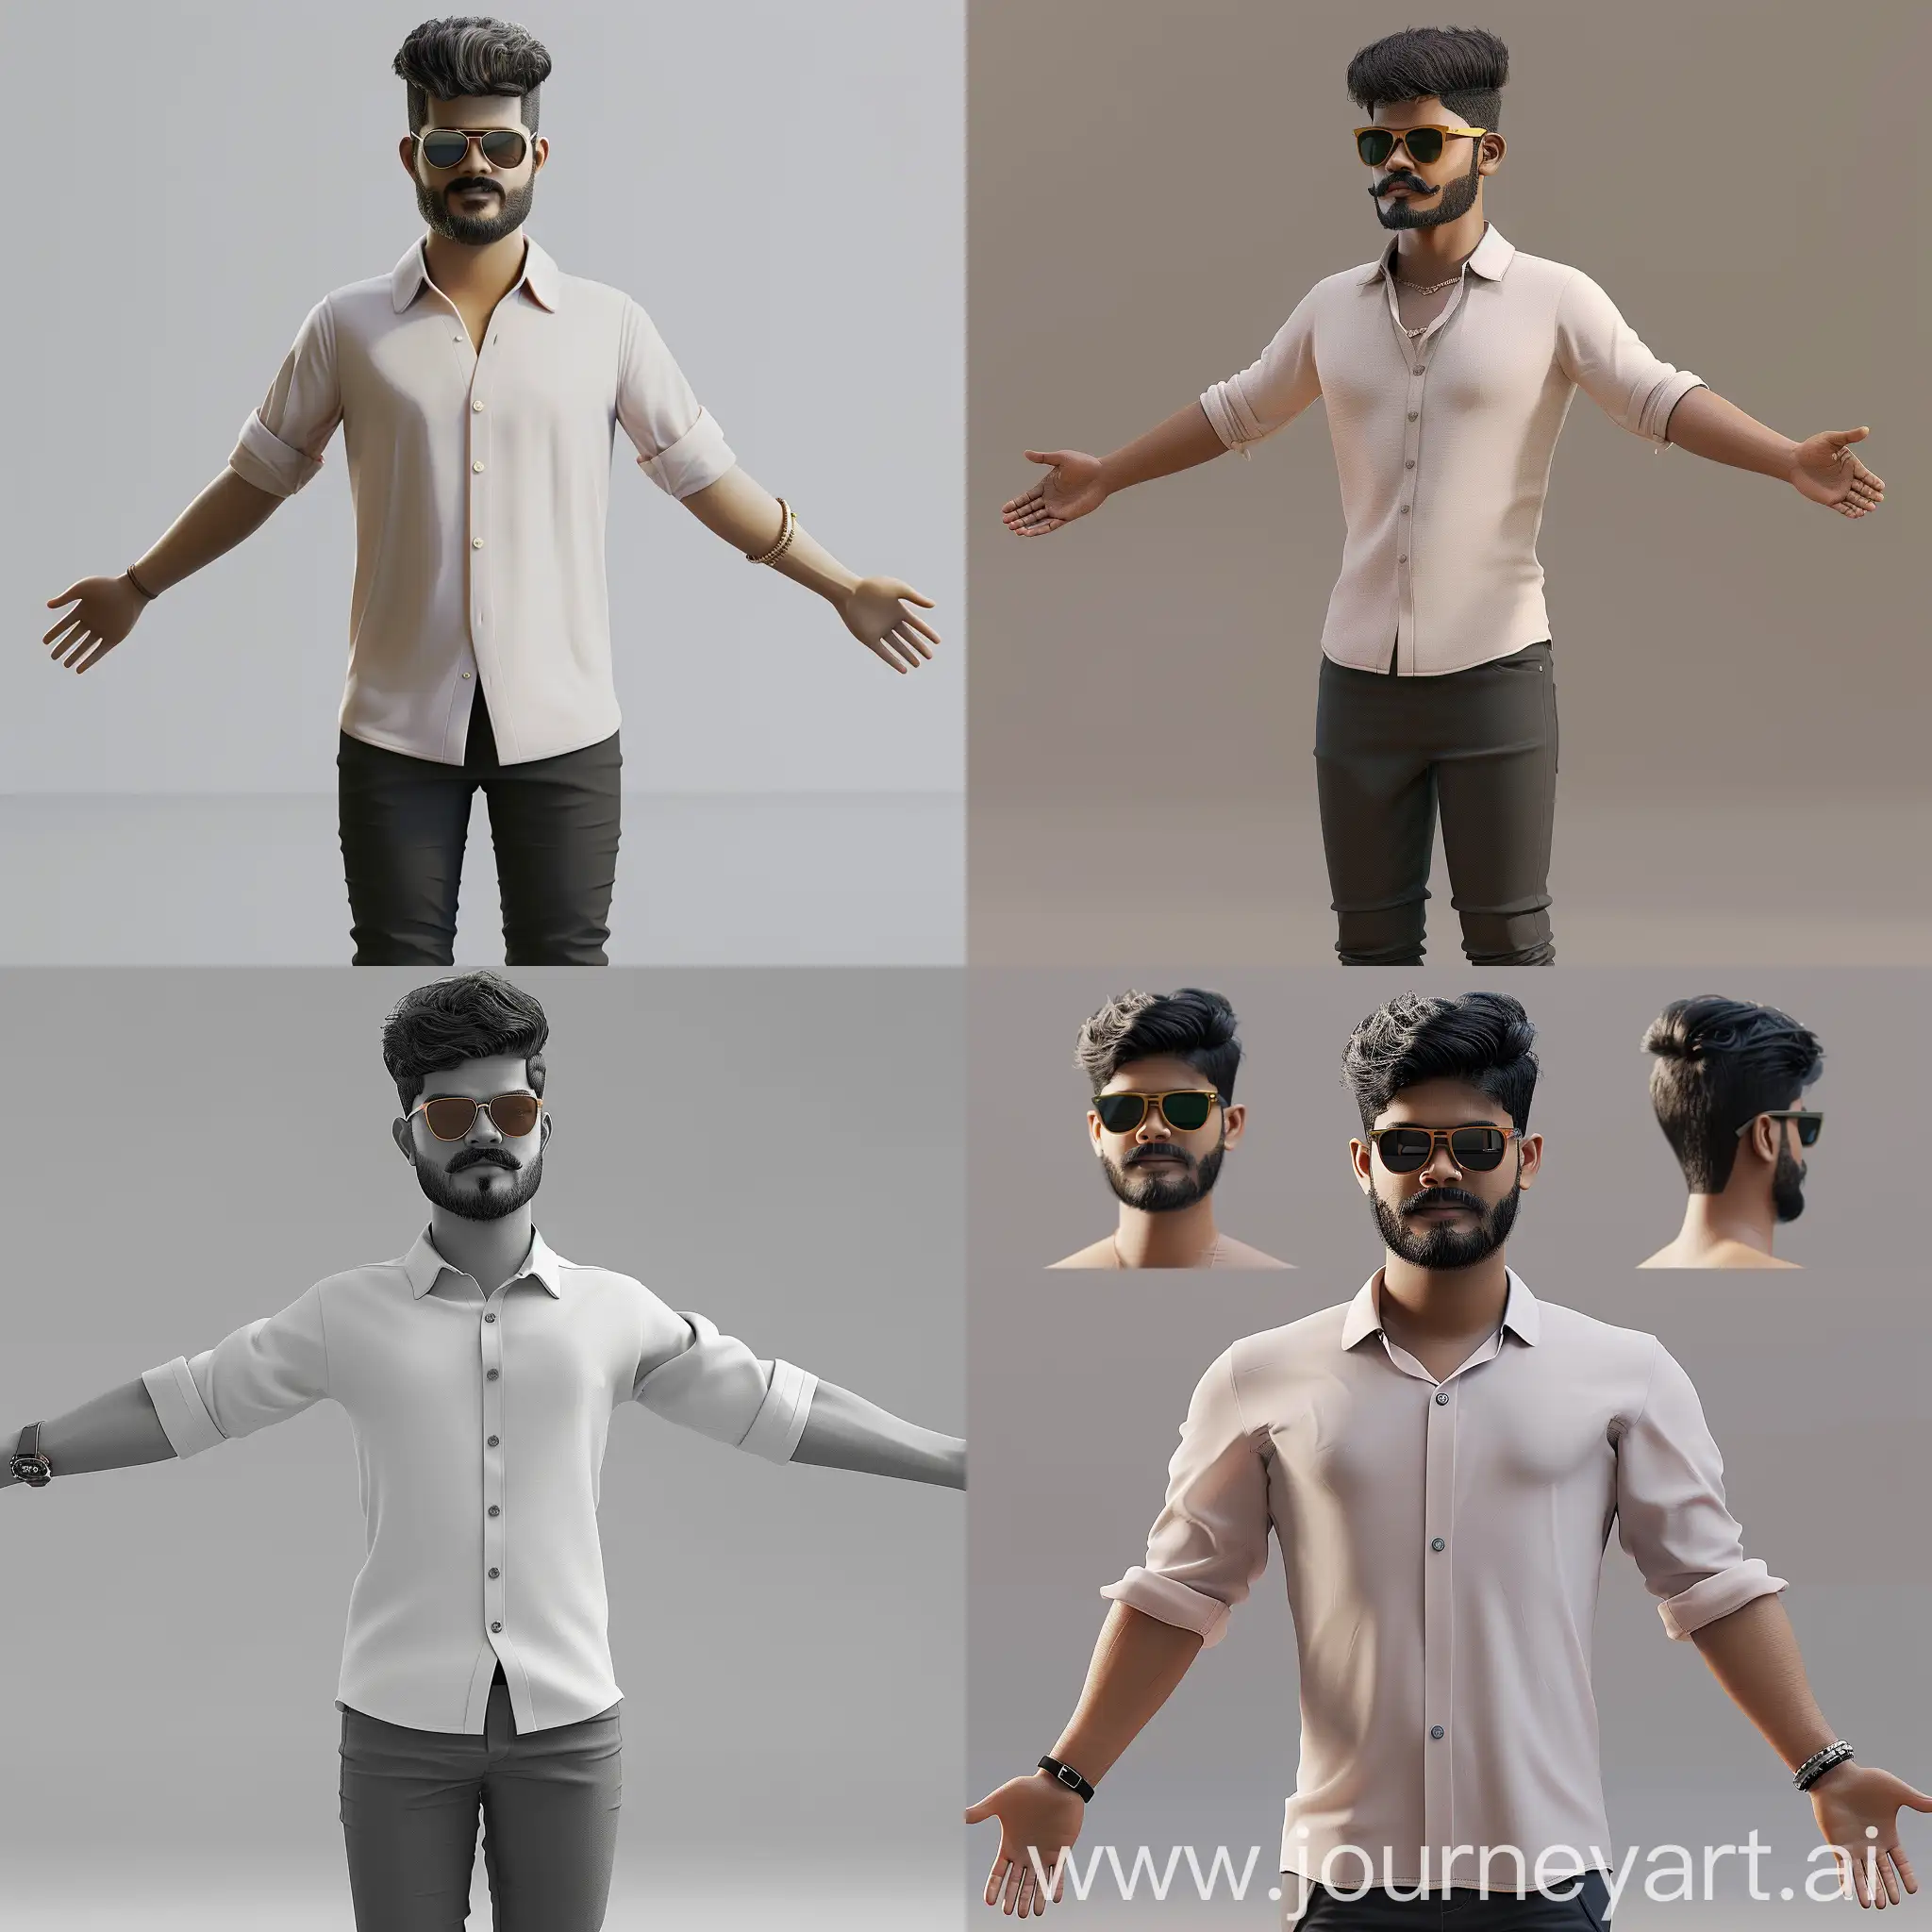 Create a 3D character model based on this image of a man. The character should be posed in a standard T-pose with arms extended horizontally and legs straight and parallel. The character should have the same facial features, hairstyle, beard, sunglasses, and clothing as depicted in the image. Ensure that the lower half of the body, including the legs and feet, are accurately generated and proportionate to the upper half of the body. Maintain the style and color of the clothing. Provide a neutral background for clarity also use the exact same face from the image i shared in cref